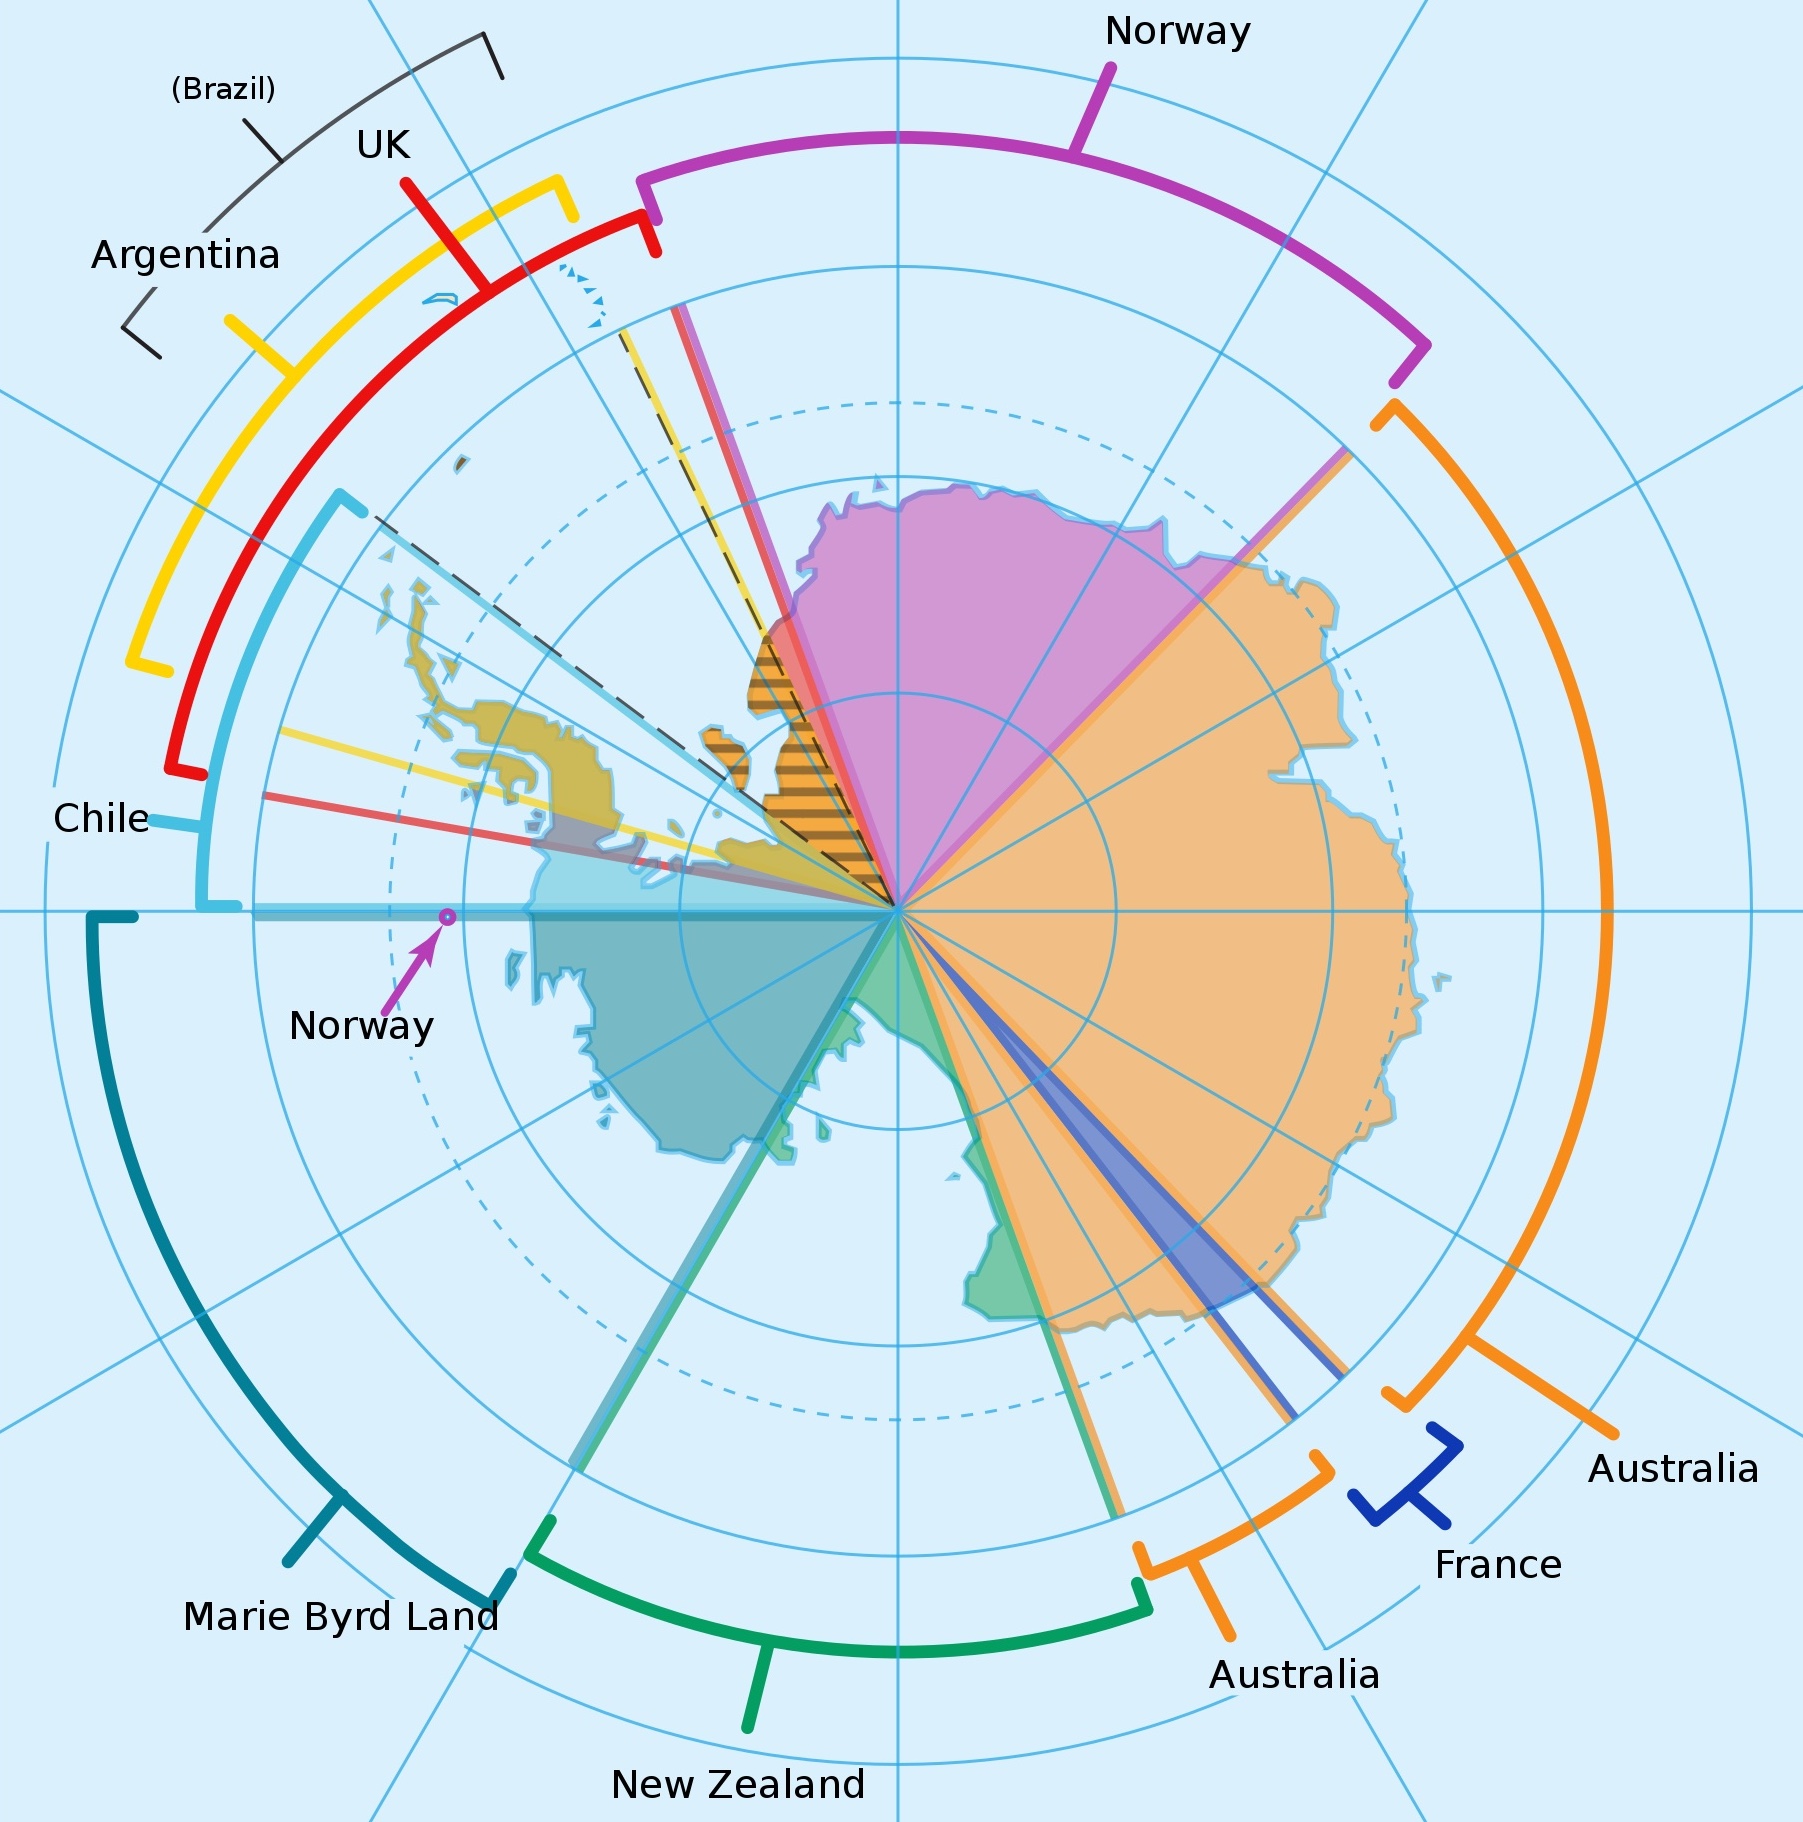 The antarctic ice sheet is shown in a circle with different colors.